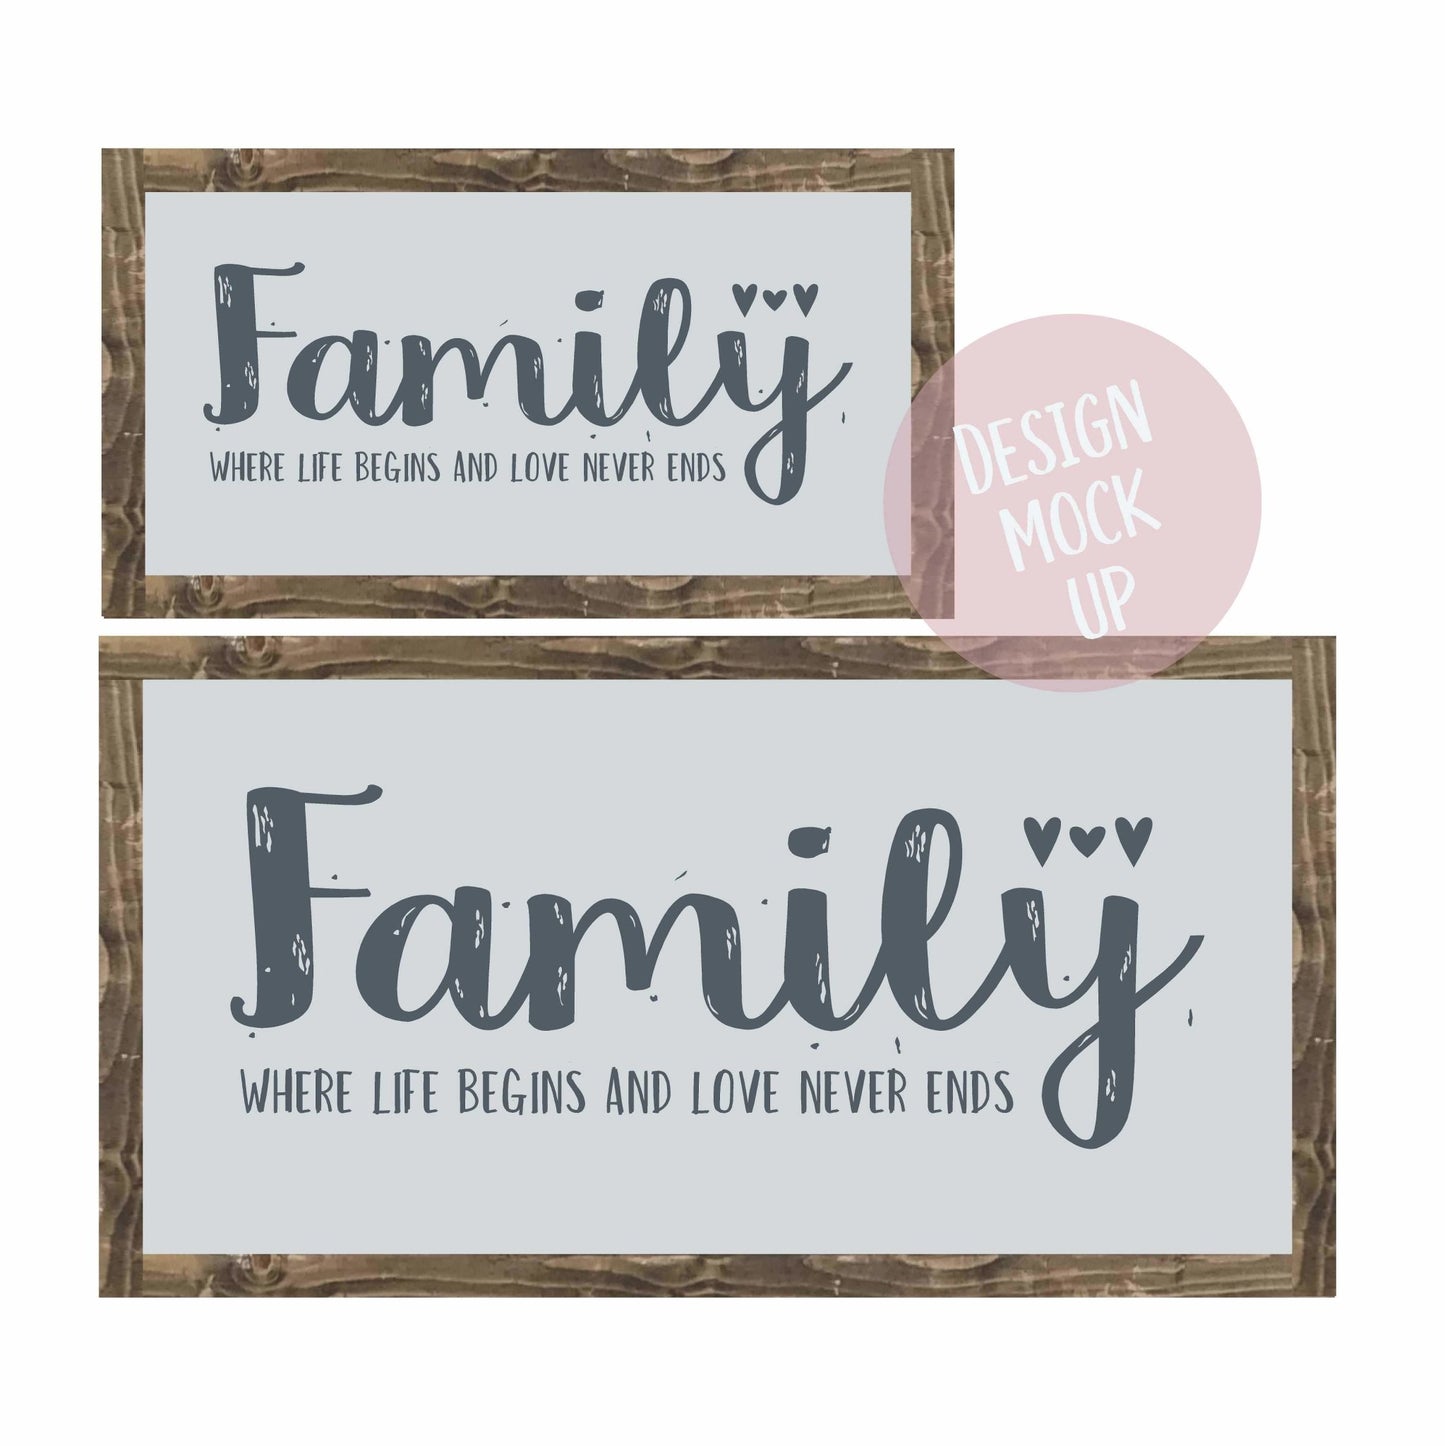 Family - Where Life Begins | Framed Wood Sign | #BrainTumourResearch - The Imperfect Wood Company - Framed Wood Sign